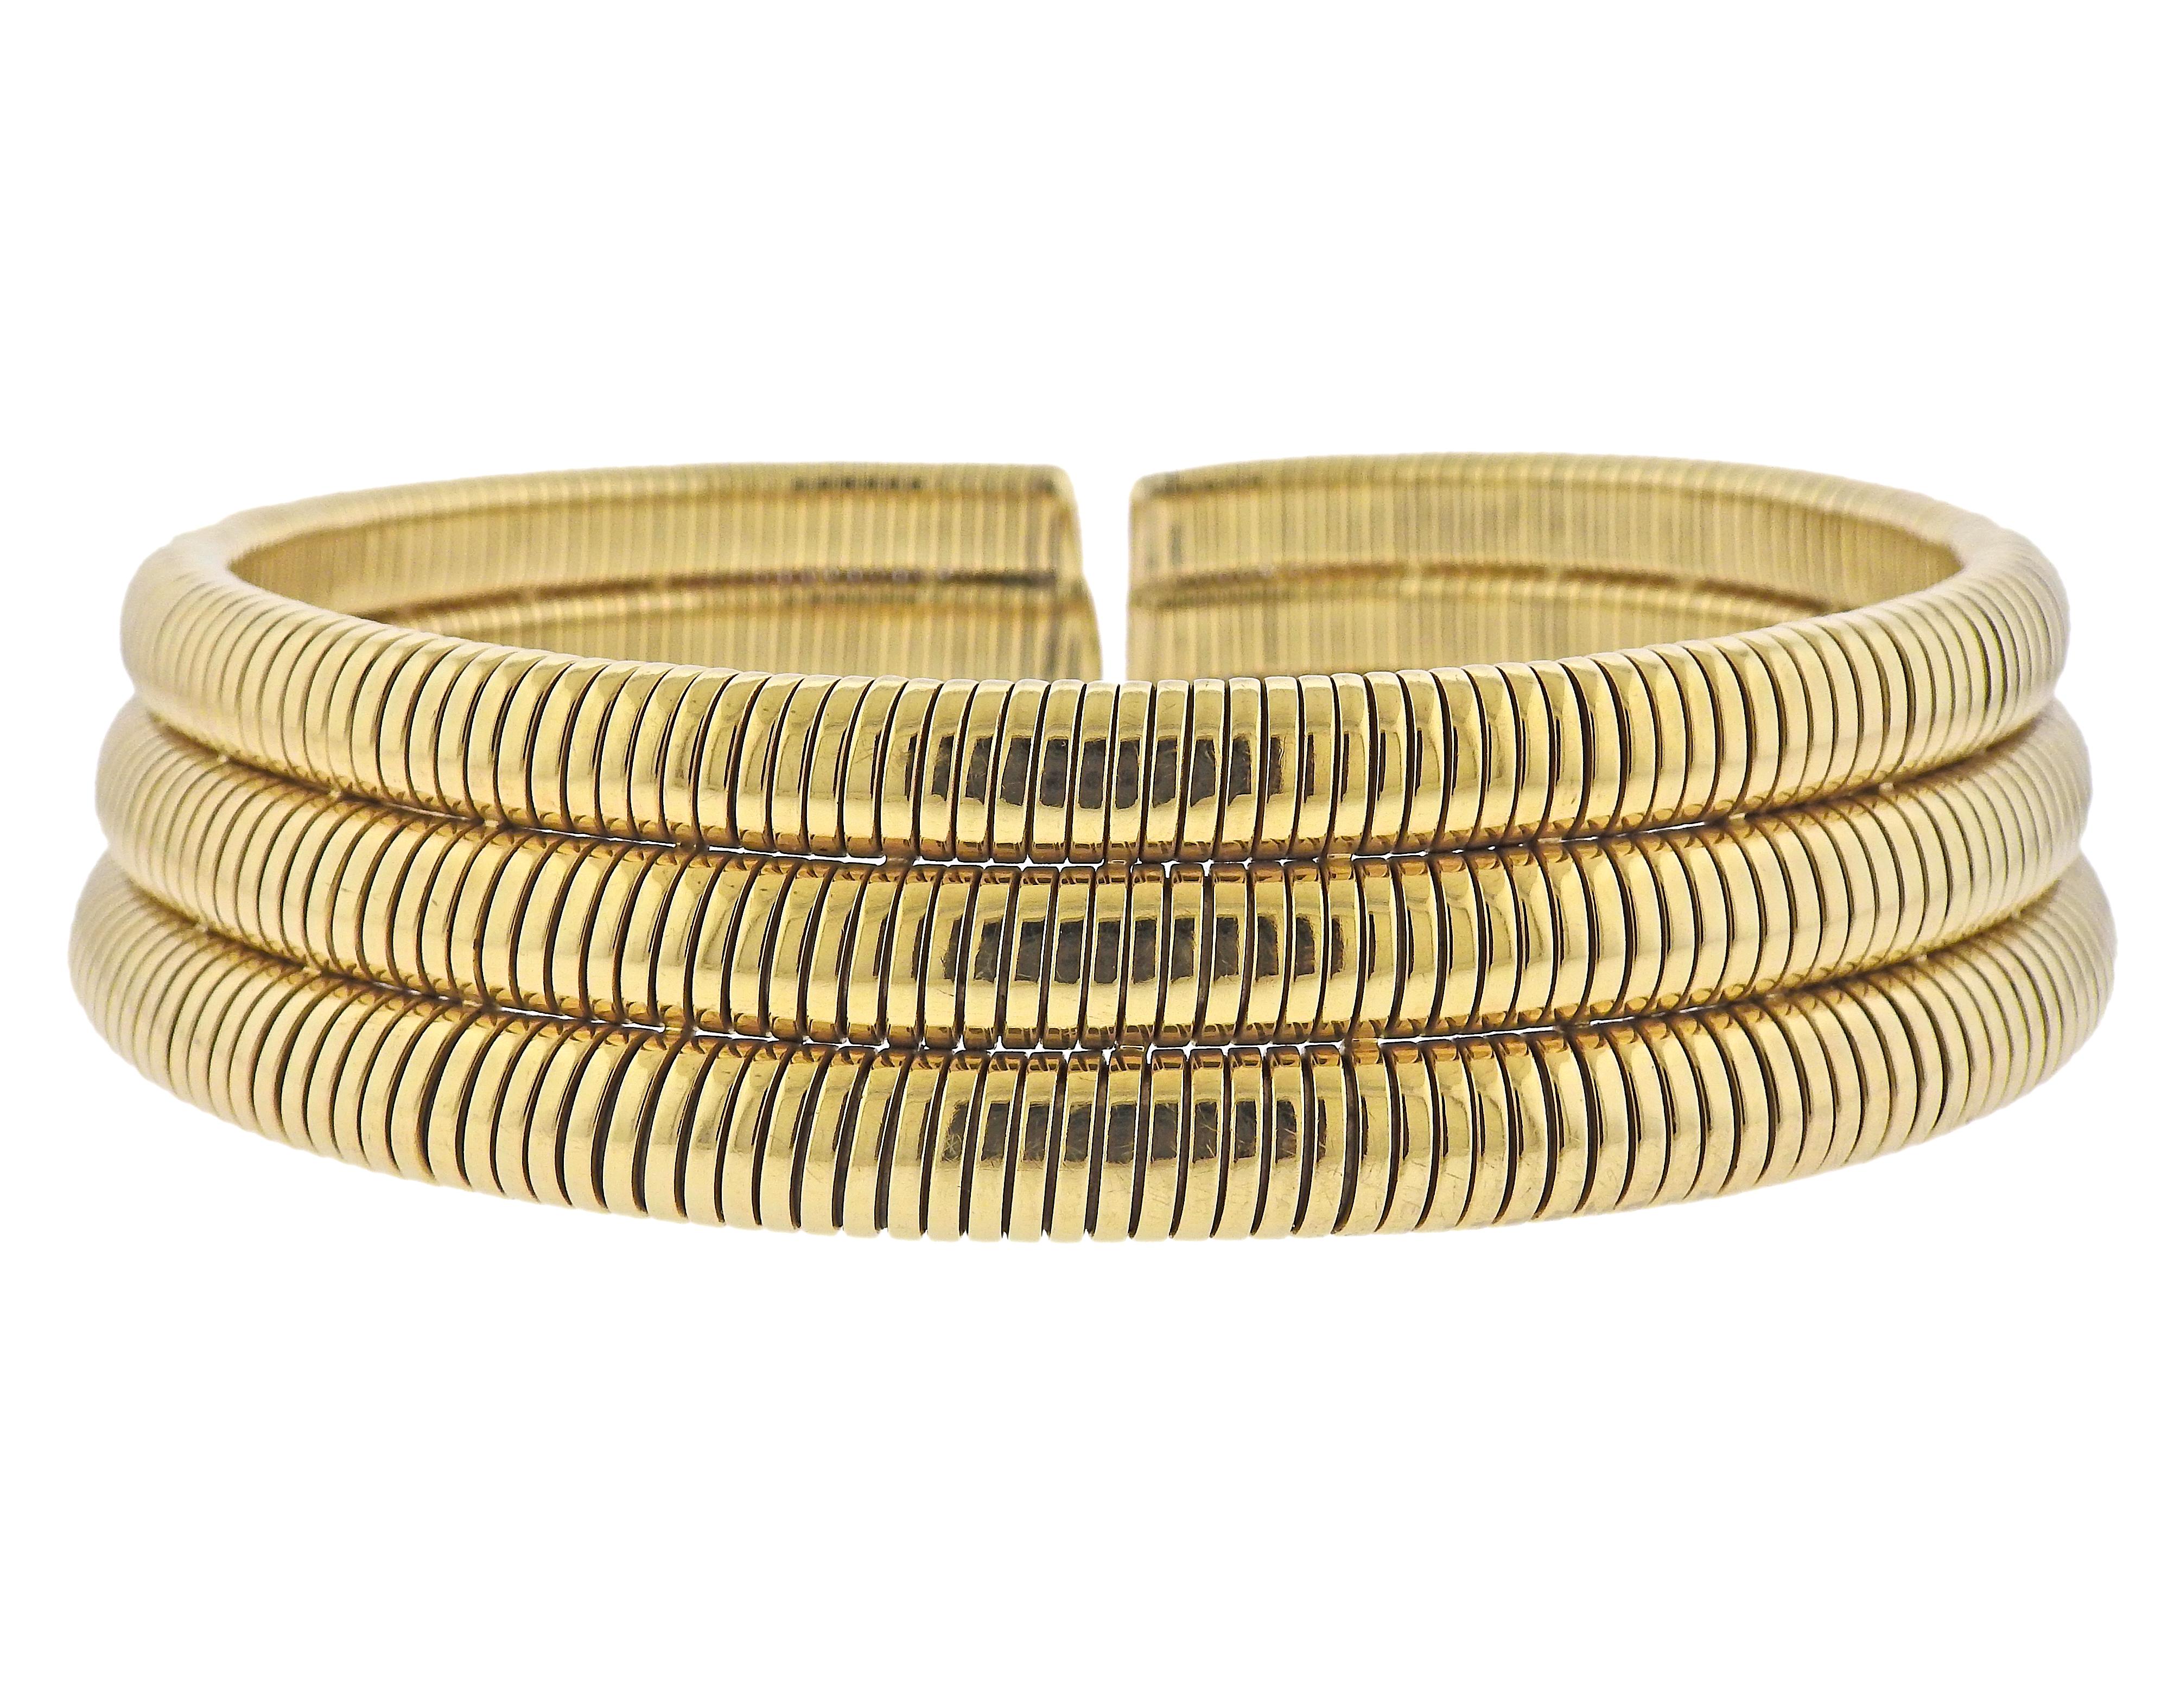 Iconic Tubogas three row collar necklace by Bvlgari. Necklace will fit an average size neck - approx. 13-13.5